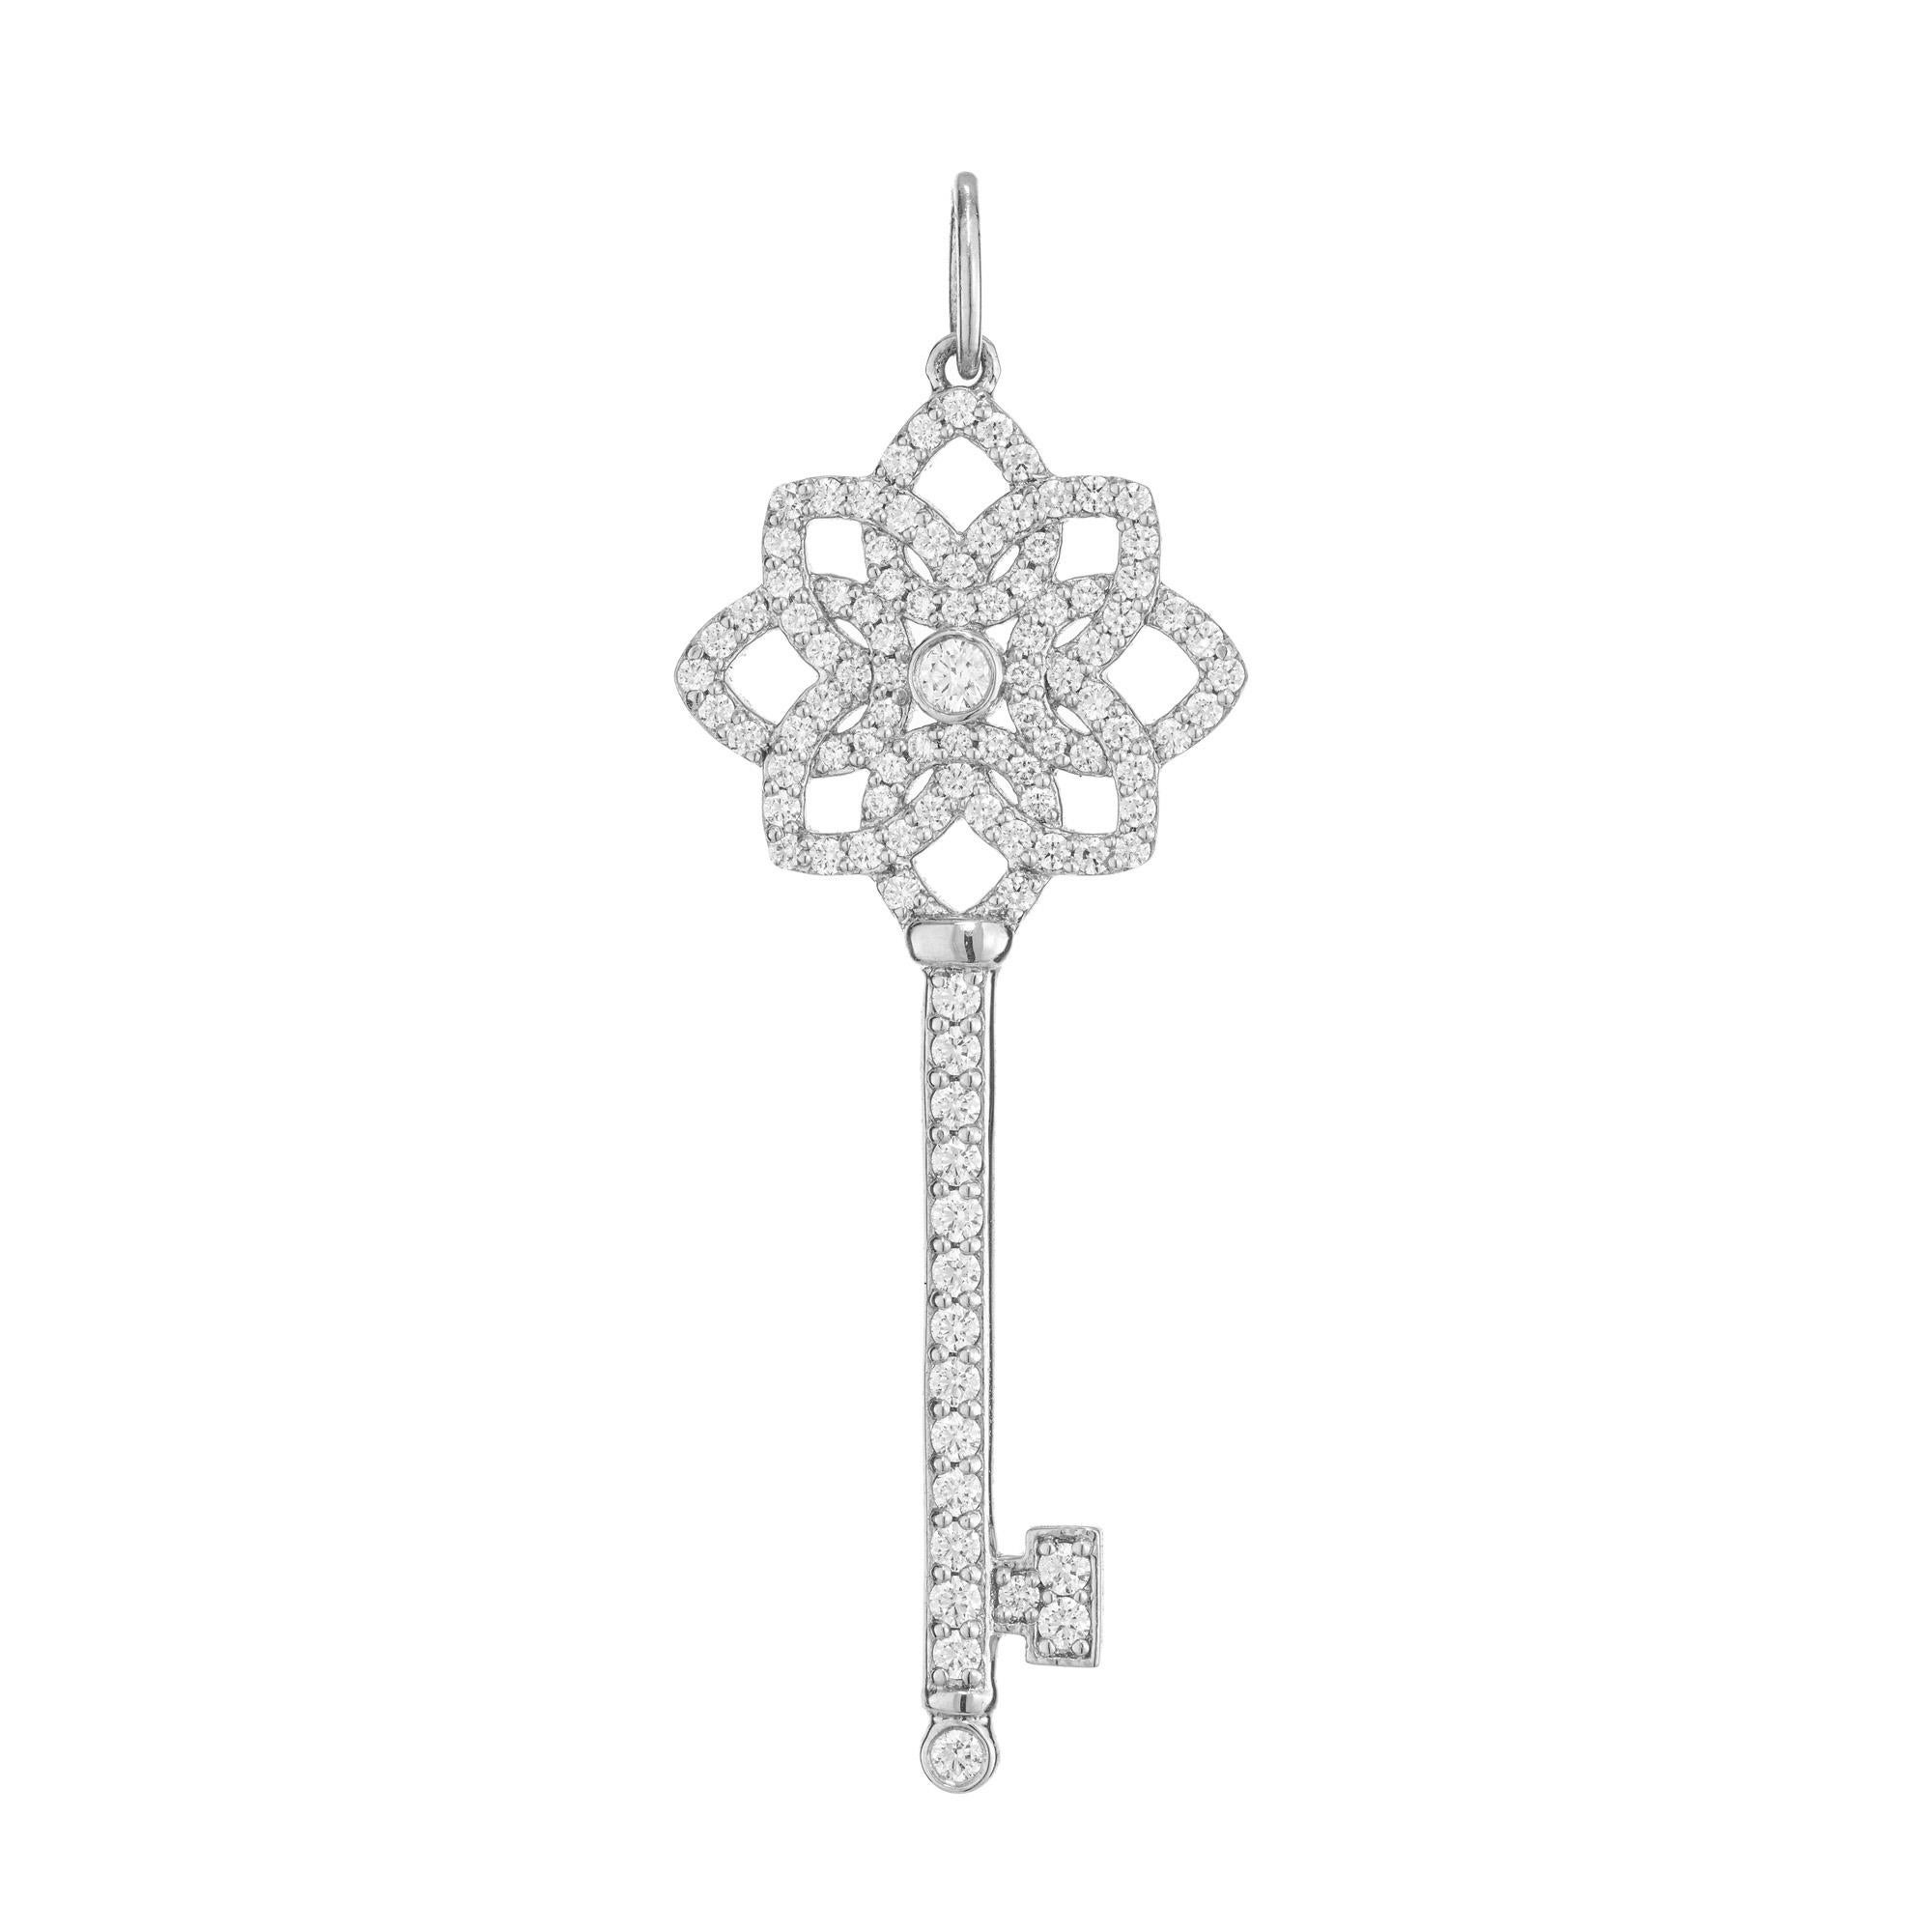 Excellent Tiffany & Co platinum diamond key pendant, medium size, 1.5 Inches long. This retired style is adorned with 107 brilliant cut diamonds with a approximate total weight of .50ccts. According to Tiffany's, their iconic Key pendants are